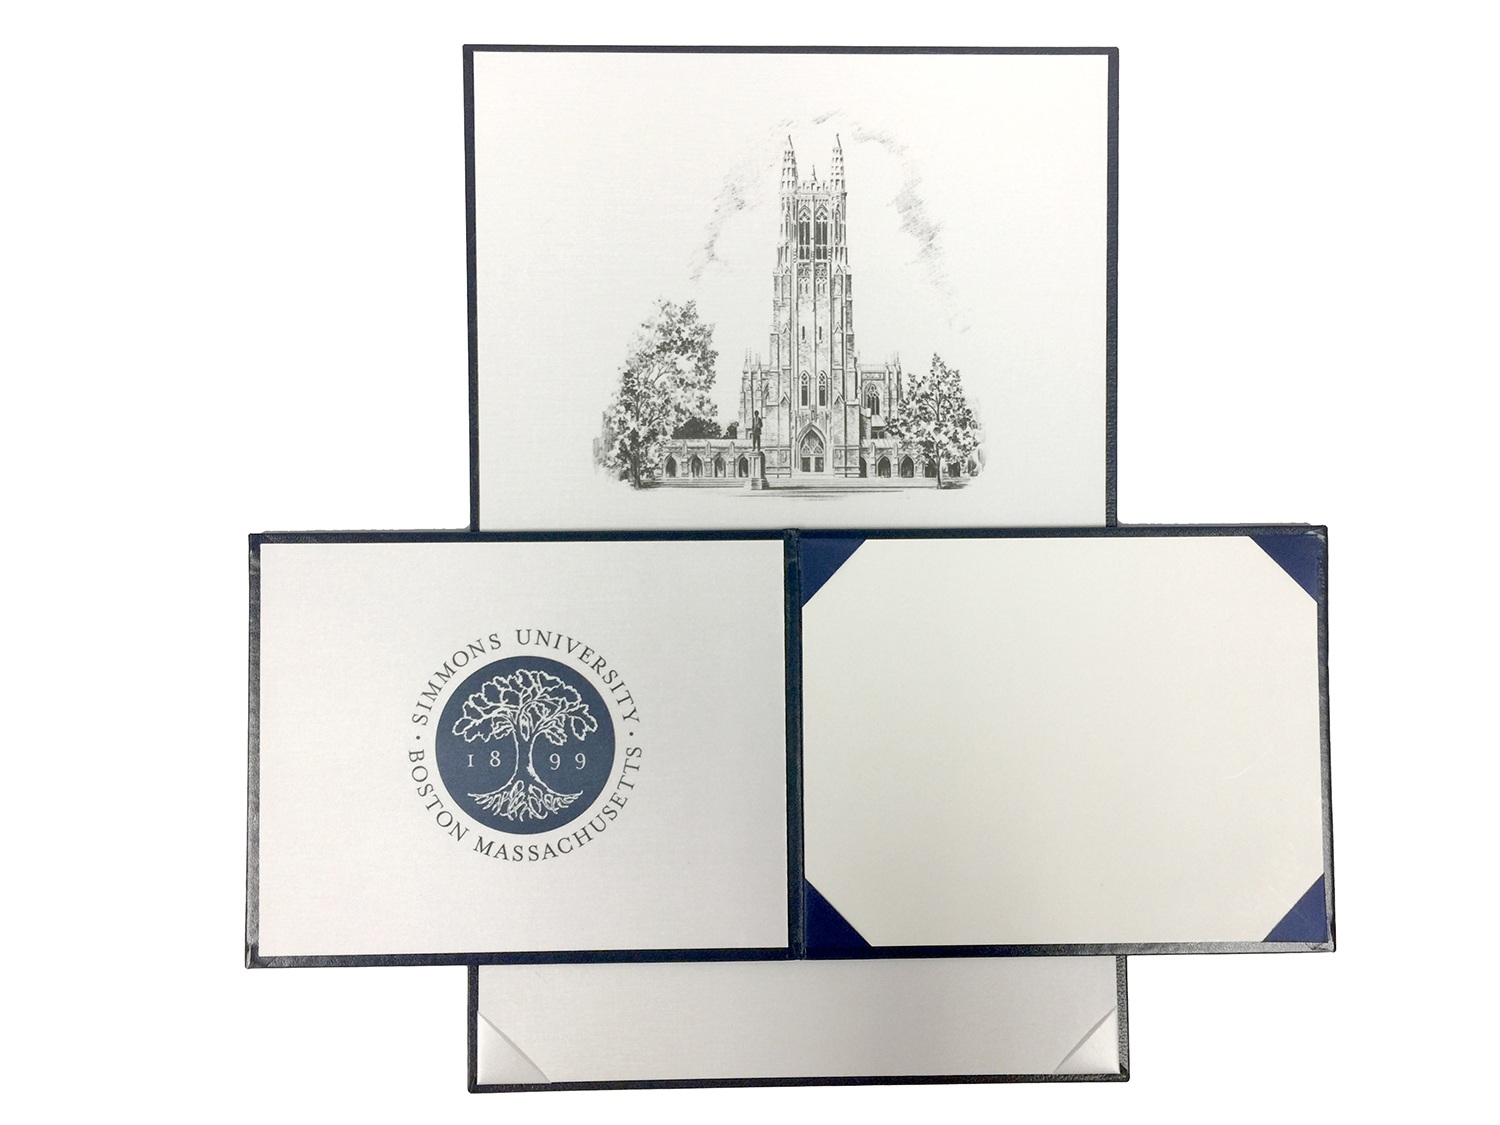 Sample etchings on diploma cover interiors